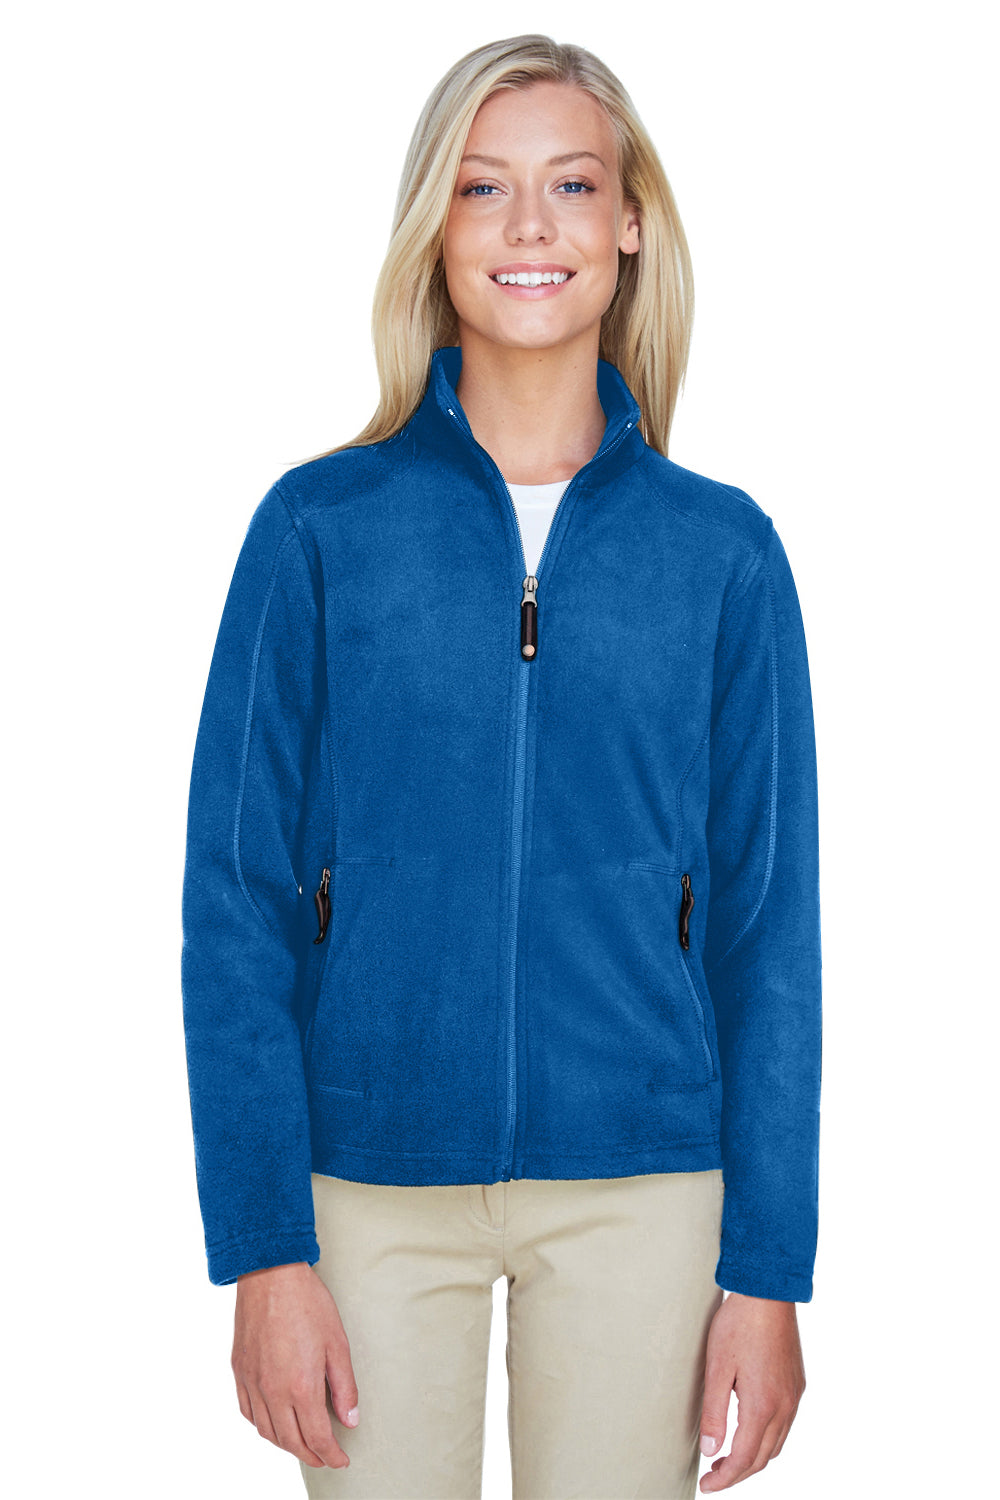 North End 78172 Womens Voyage Full Zip Fleece Jacket Royal Blue Front